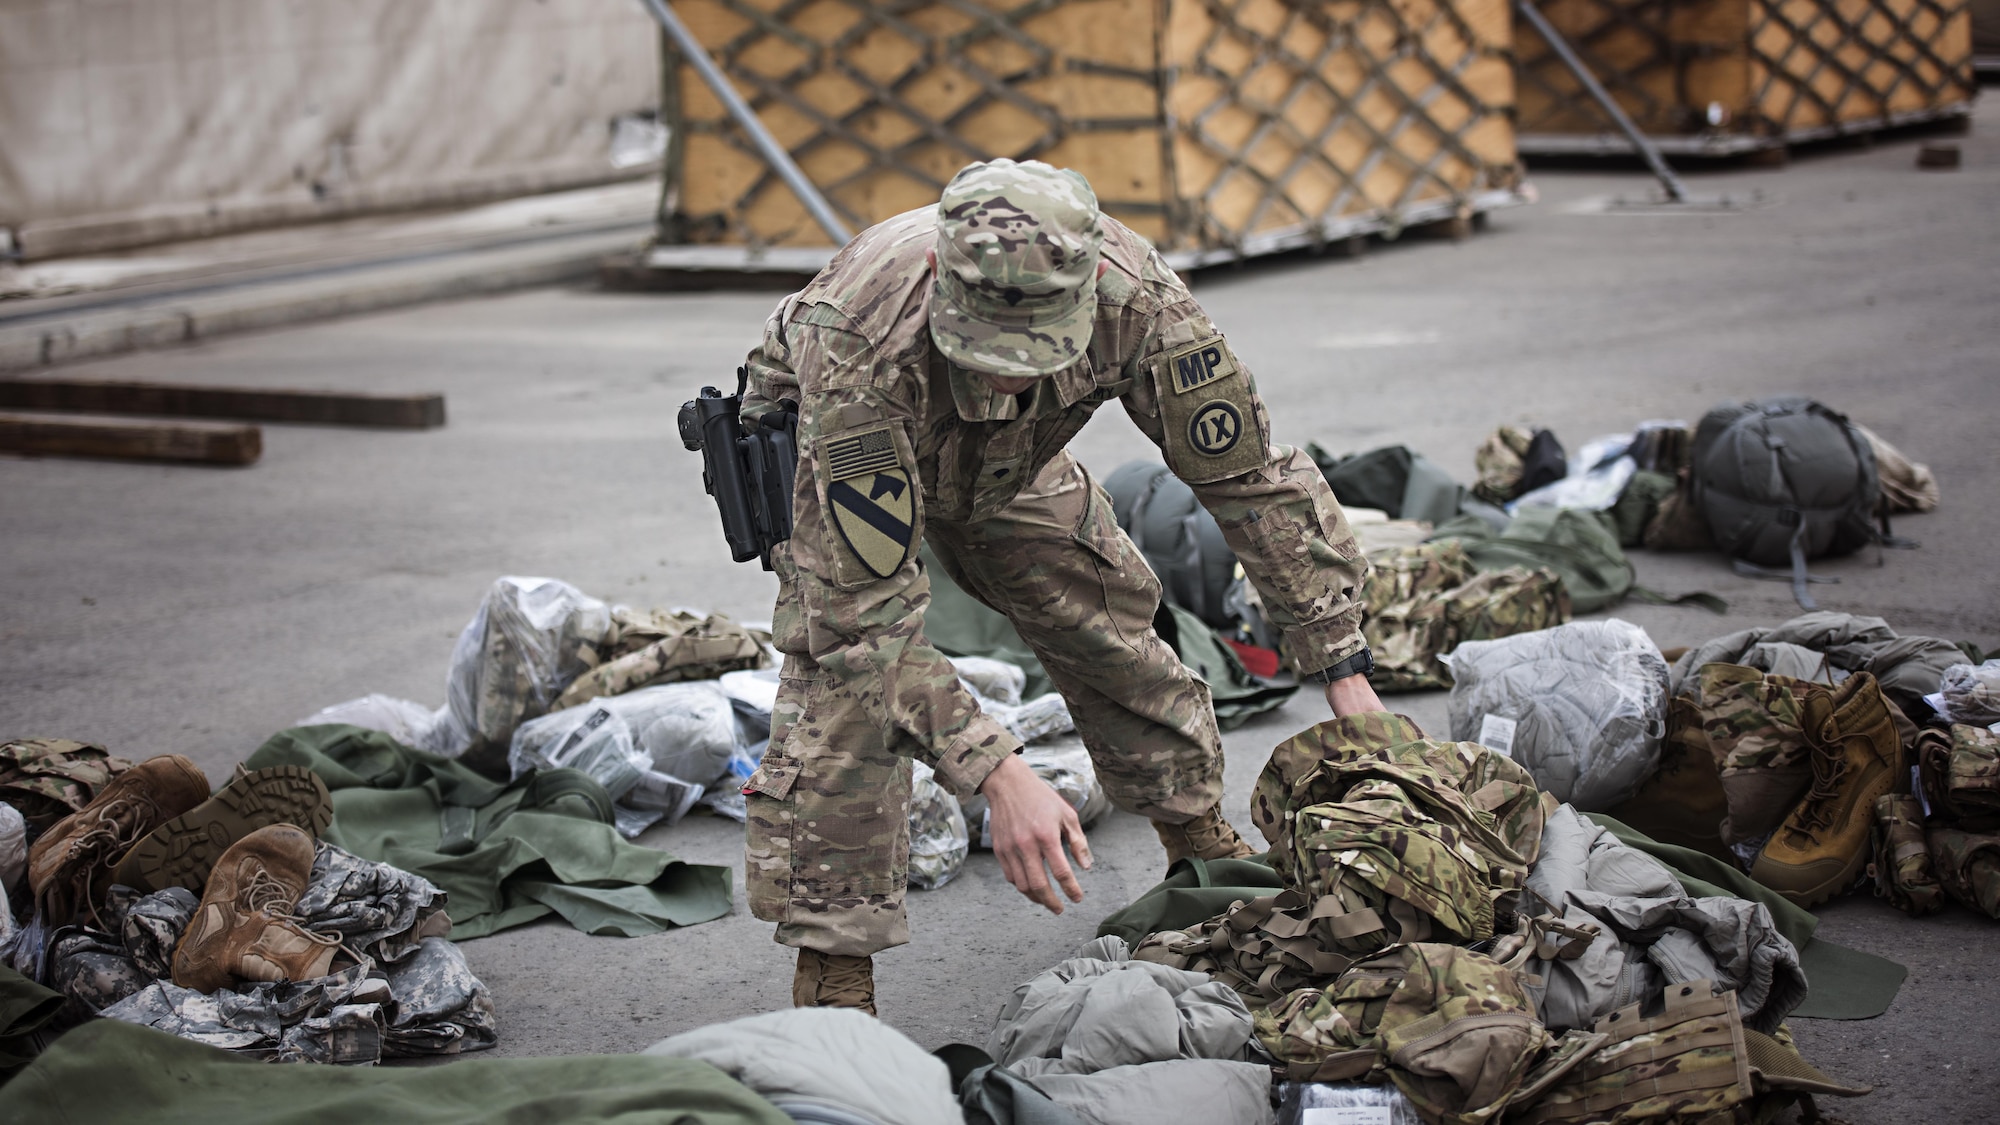 Army Spc. Ian Rode Basto, 368th Military Police Company customs agent, inspects equipment being shipped to the U.S. Feb. 14, 2017 at Hamid Karzai International Airport, Kabul. CMRE air transporters conduct joint inspections with customs agents before material is sent back to the United States. (U.S. Air Force photo by Staff Sgt. Katherine Spessa)